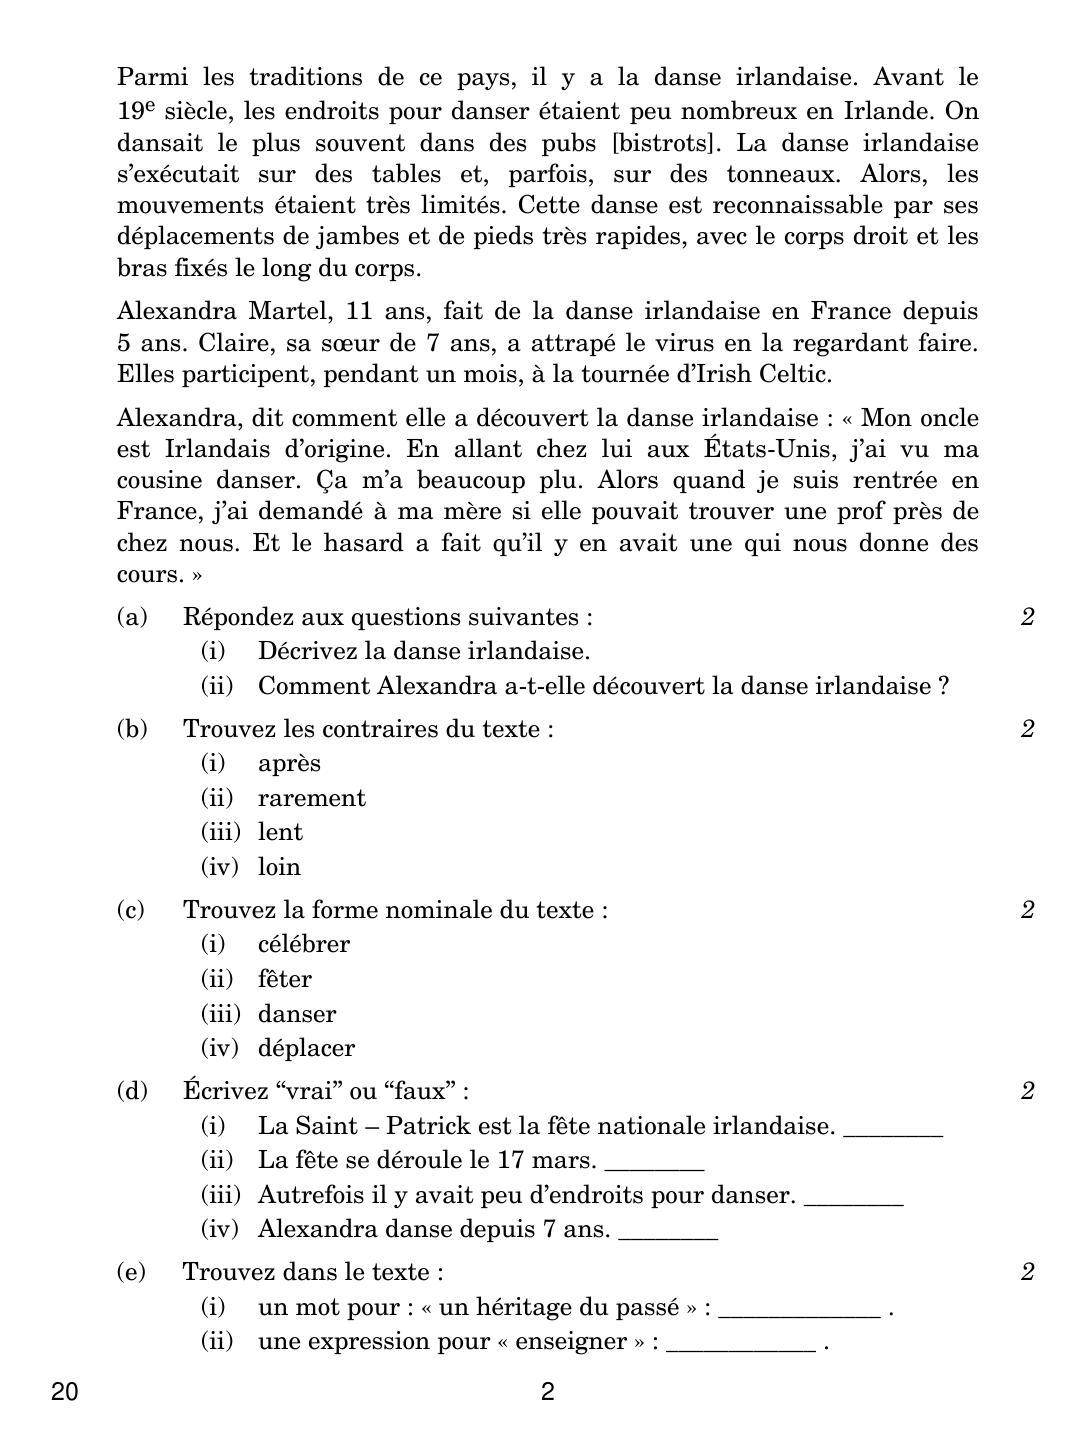 CBSE Class 10 20 French 2019 Compartment Question Paper - Page 2